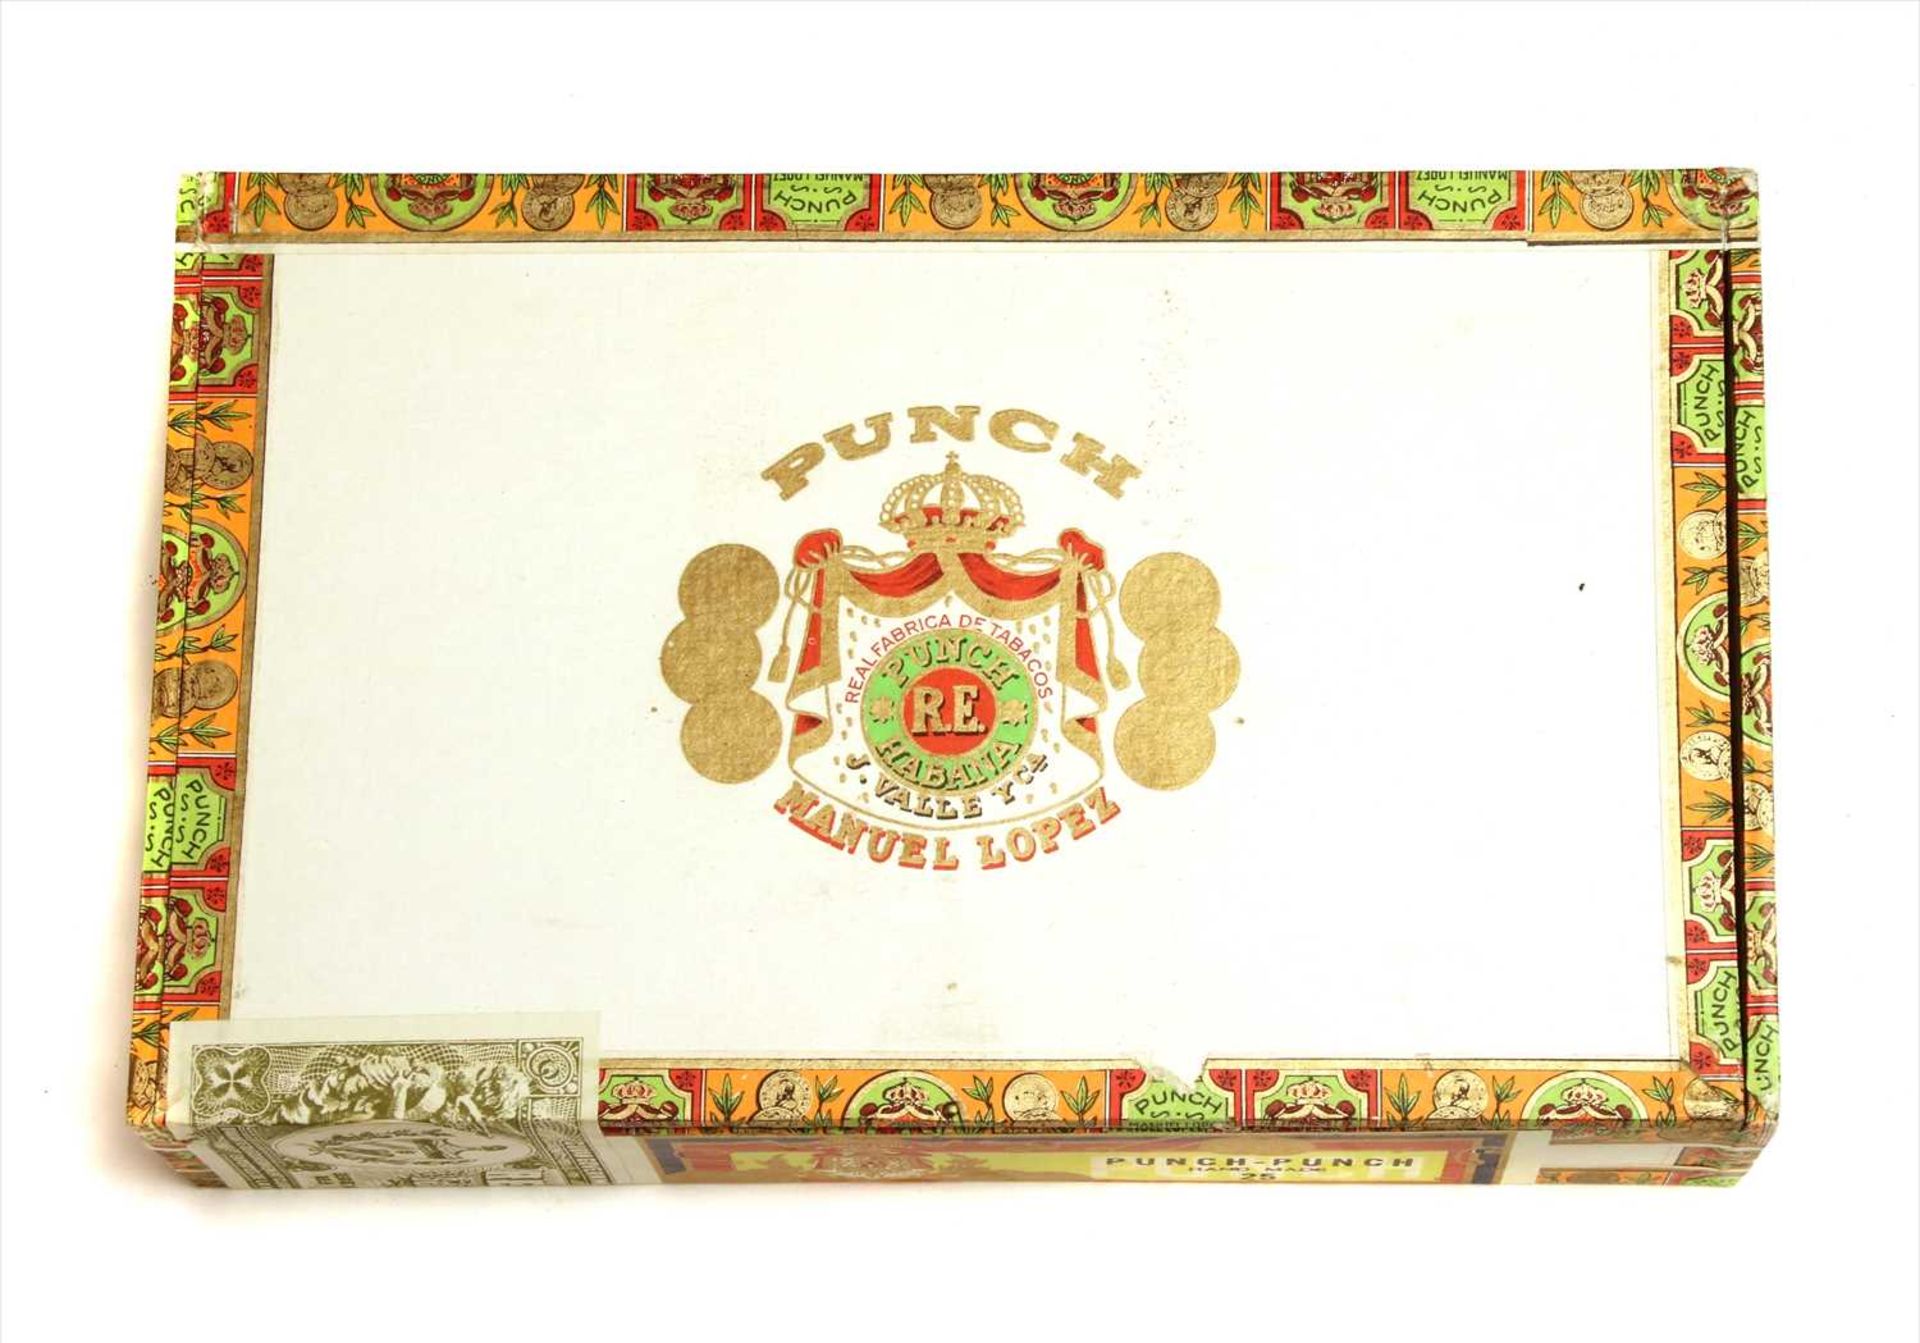 J. Valle & Co, Manuel Lopez, 25 Punch-Punch, boxed